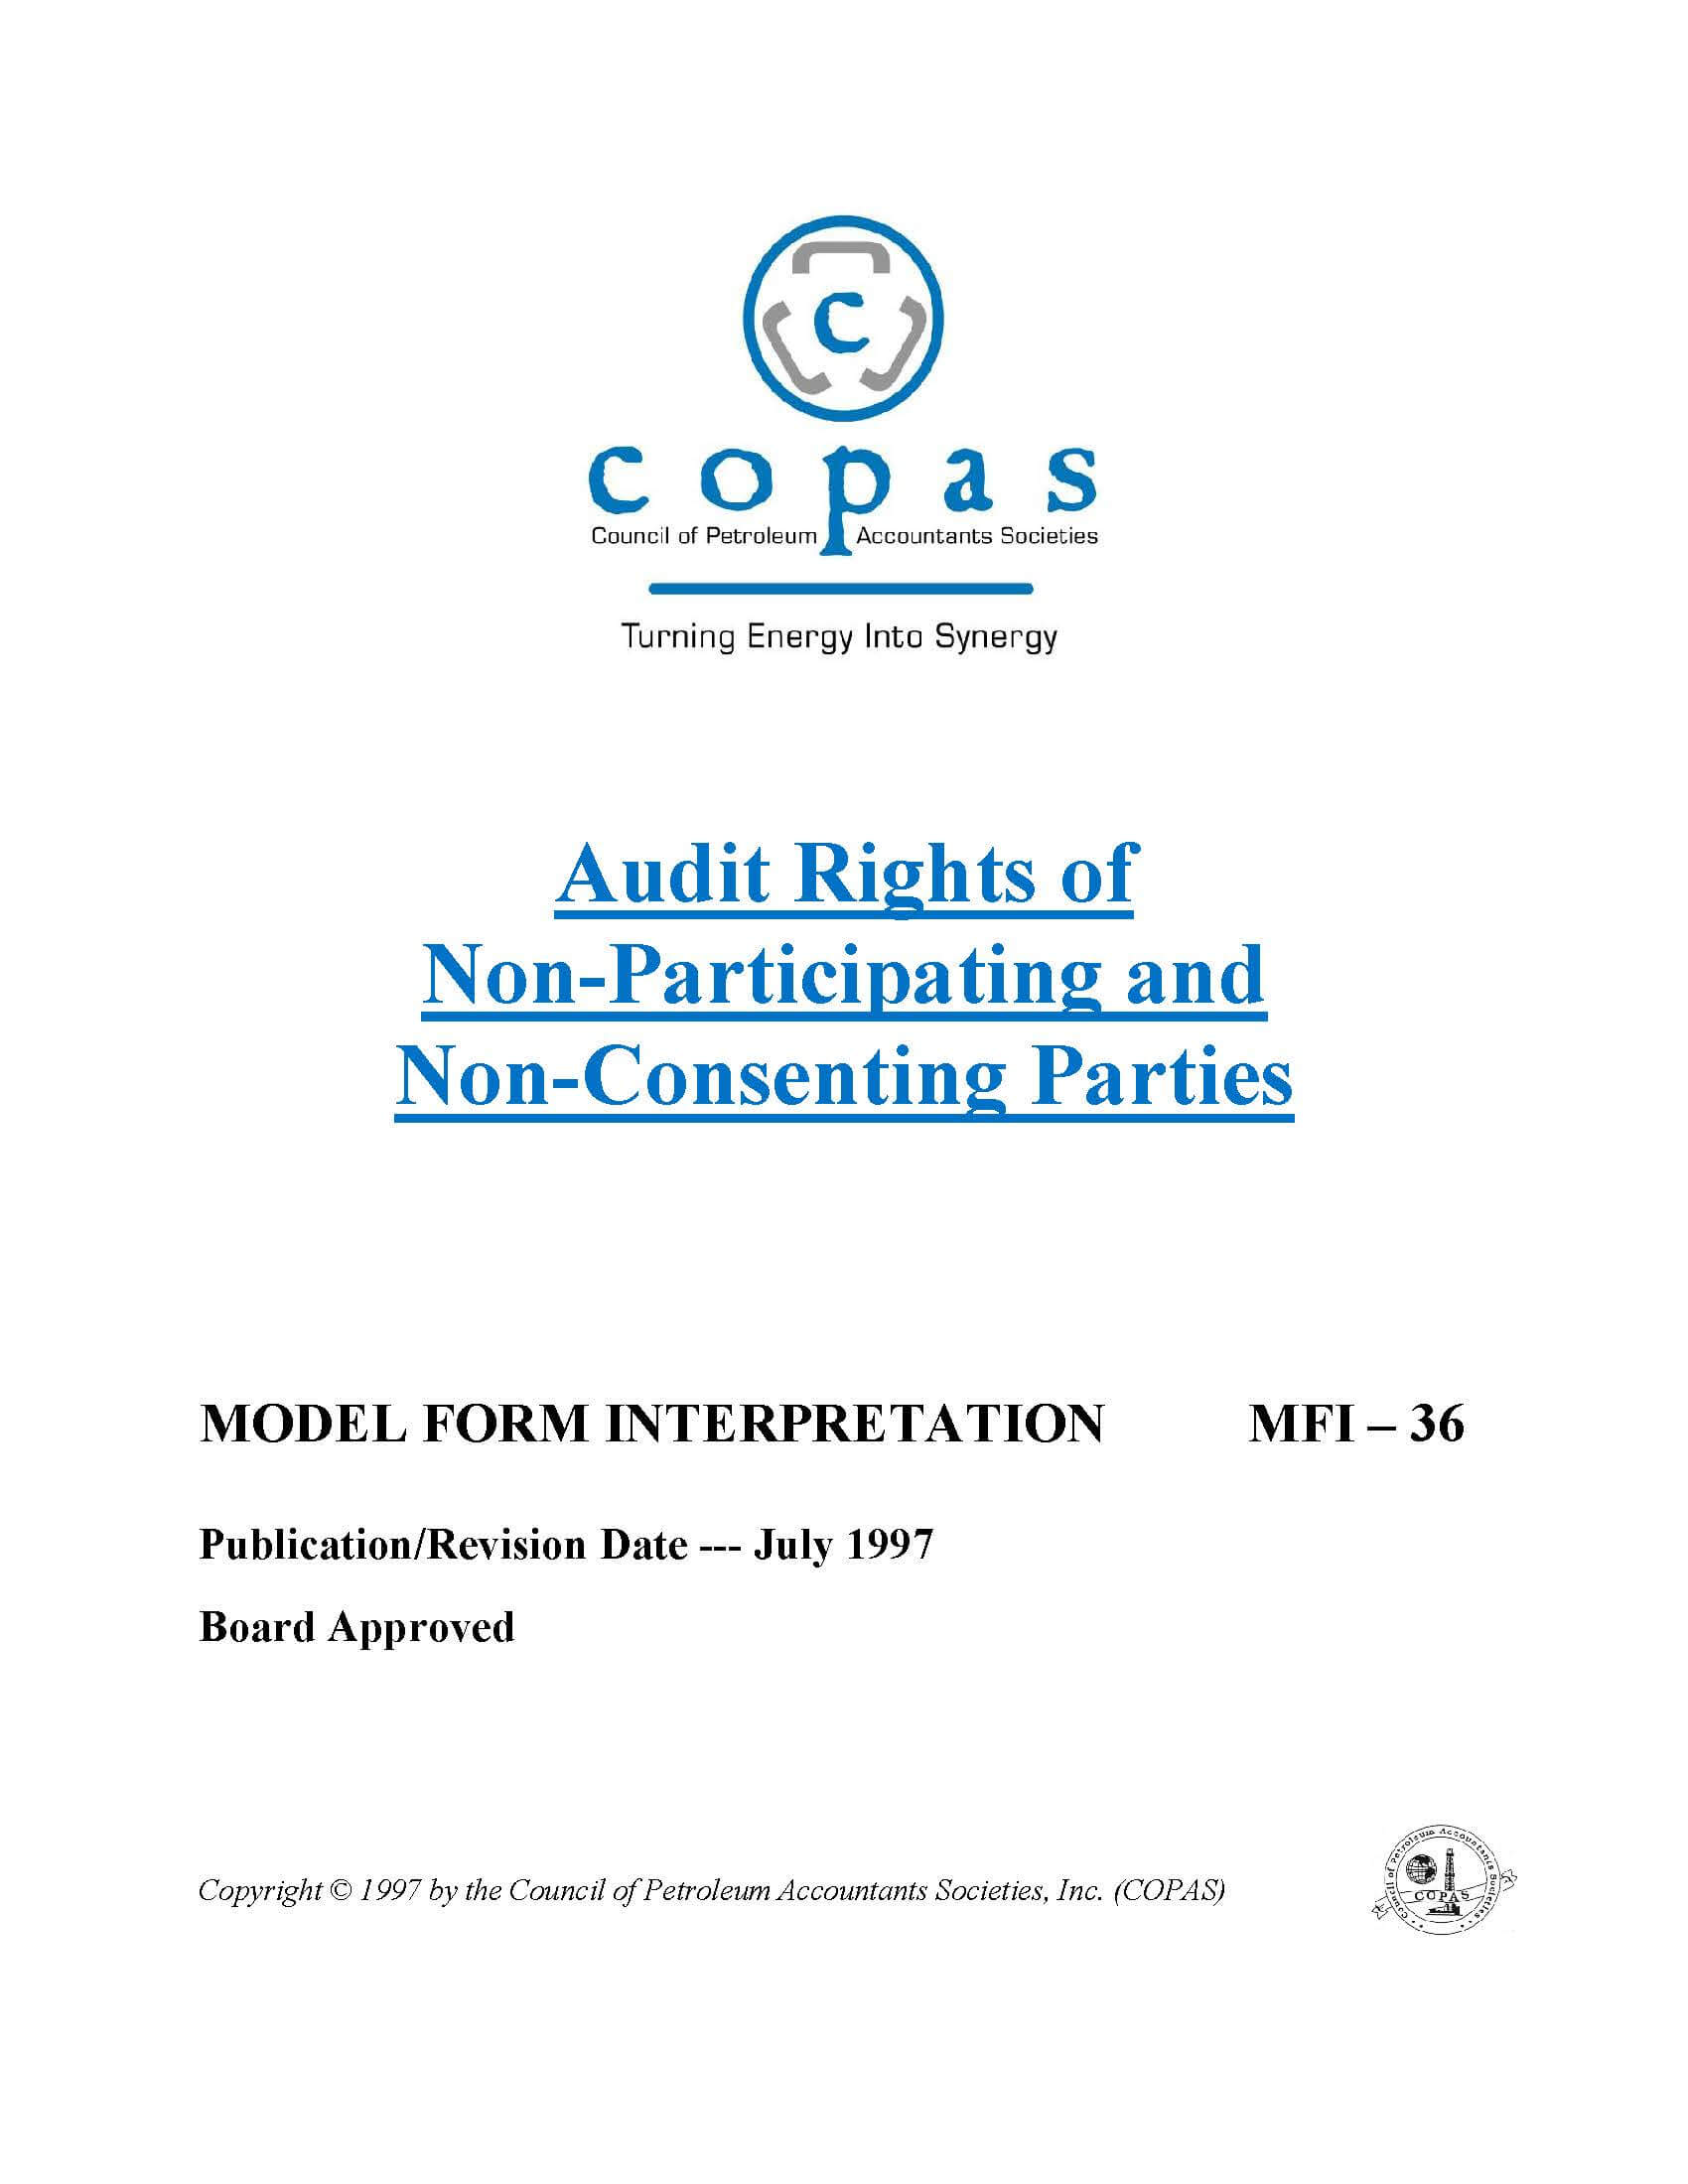 MFI-36 Audit Rights of Non Participating and Non Consenting Parties